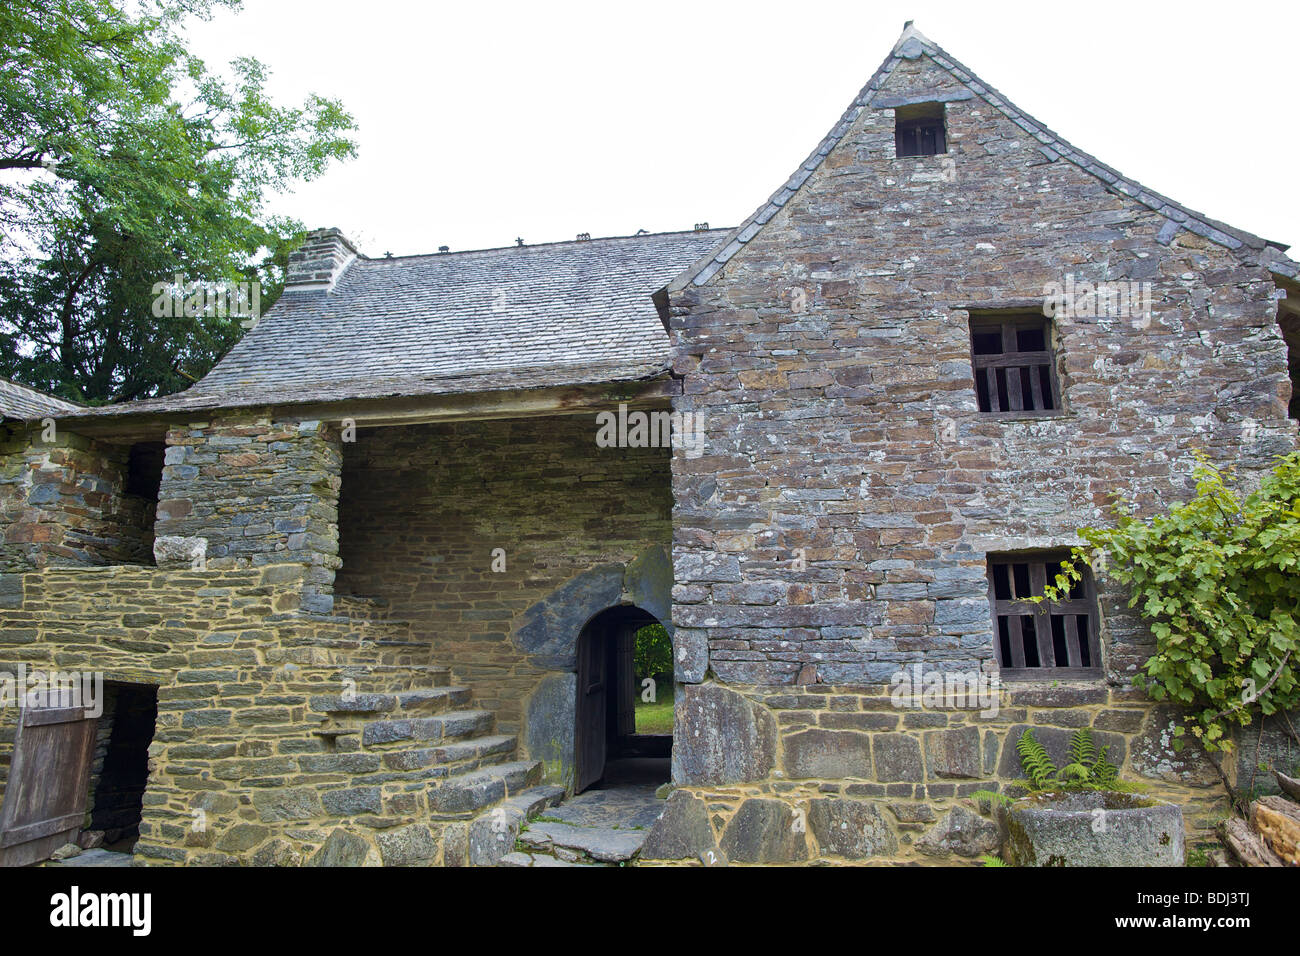 Maison Cornec or Cornec House, one of the first eco-museums in France. The House. Stock Photo